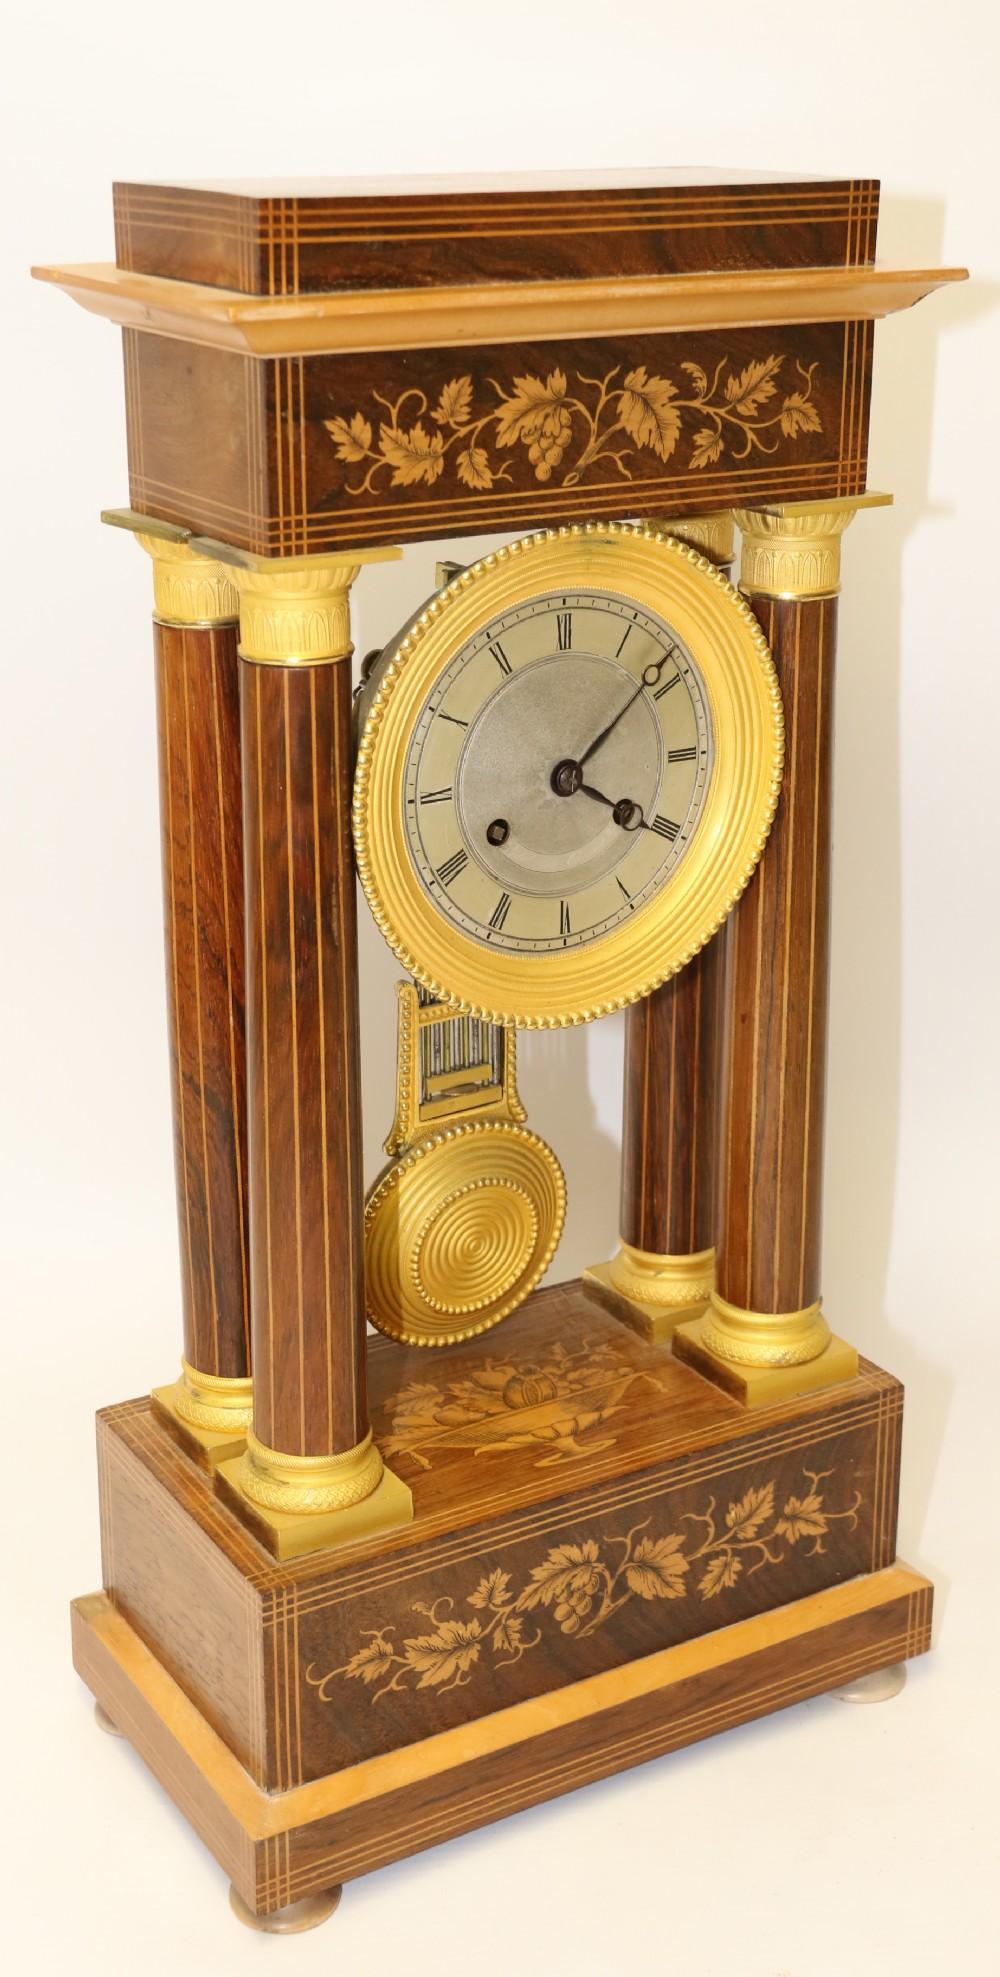 Mid-19th Century French Marquetry and Ormolu Mounted 14 Day Striking Portico Clock, circa 1830 For Sale